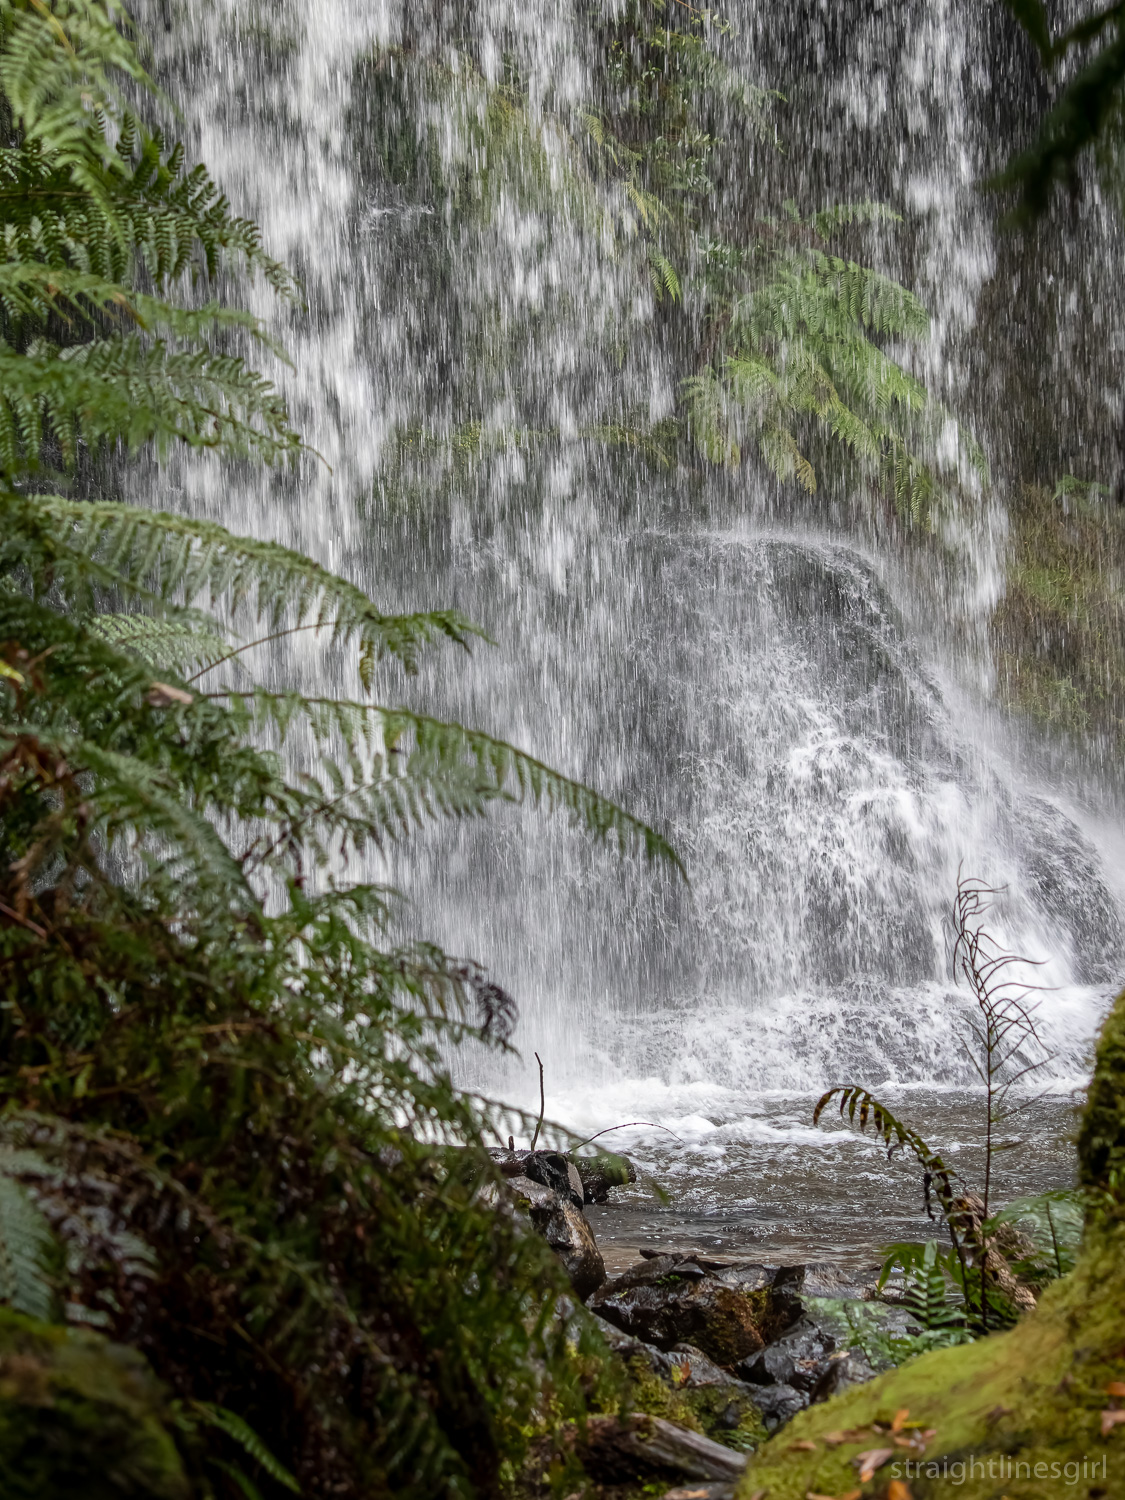 Closeup of a waterfall behind some ferns